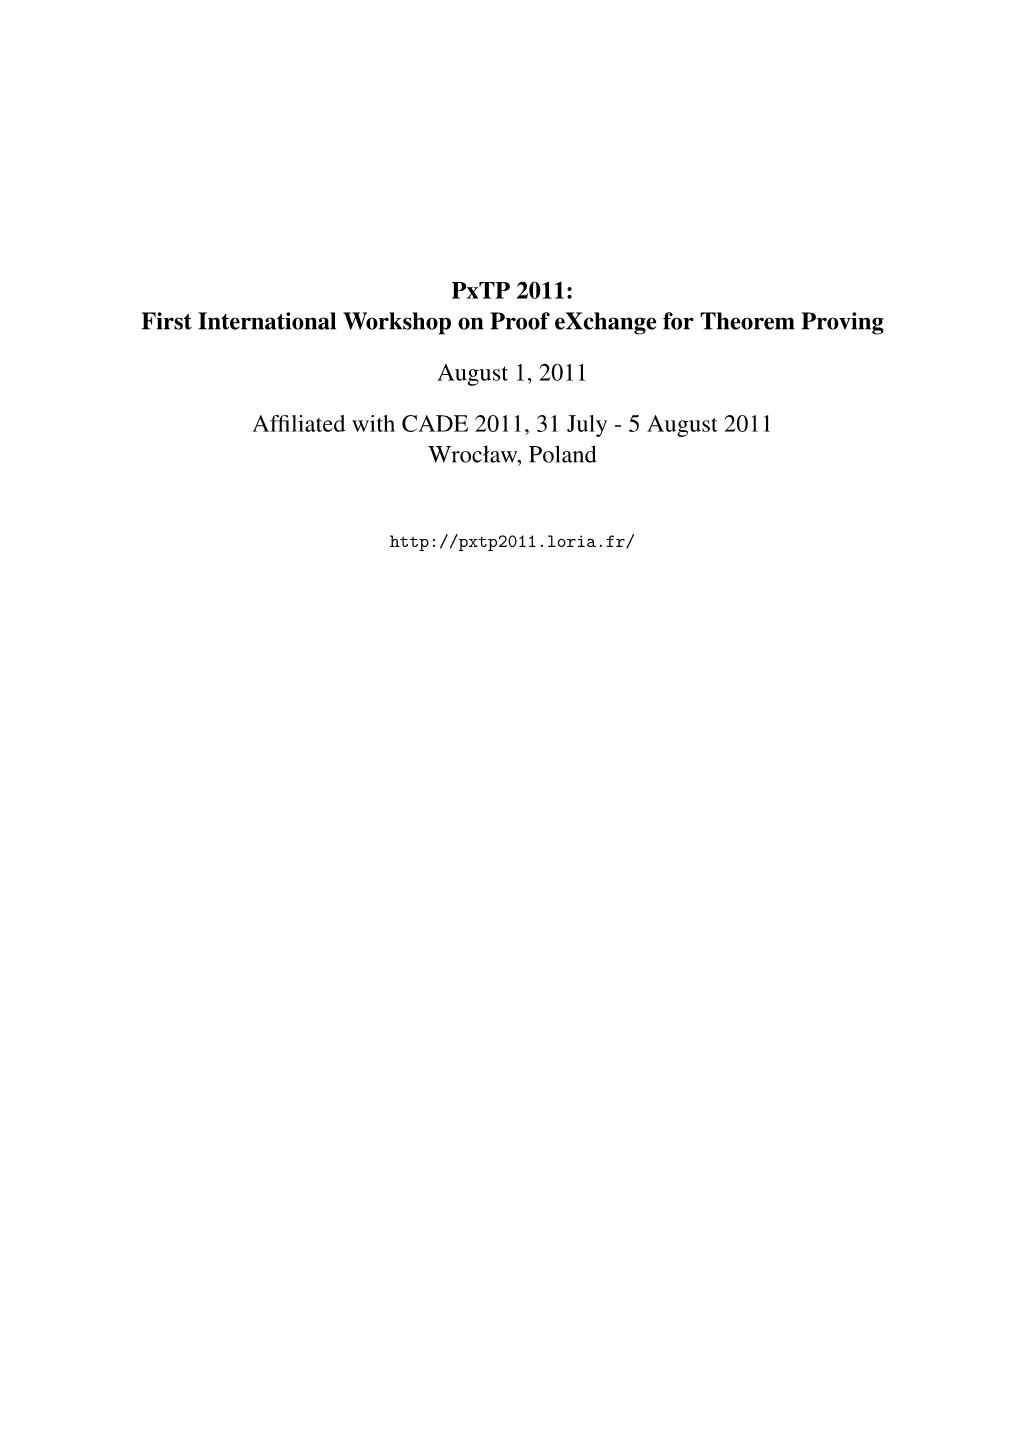 First International Workshop on Proof Exchange for Theorem Proving August 1, 2011 Affiliated with CADE 2011, 31 July